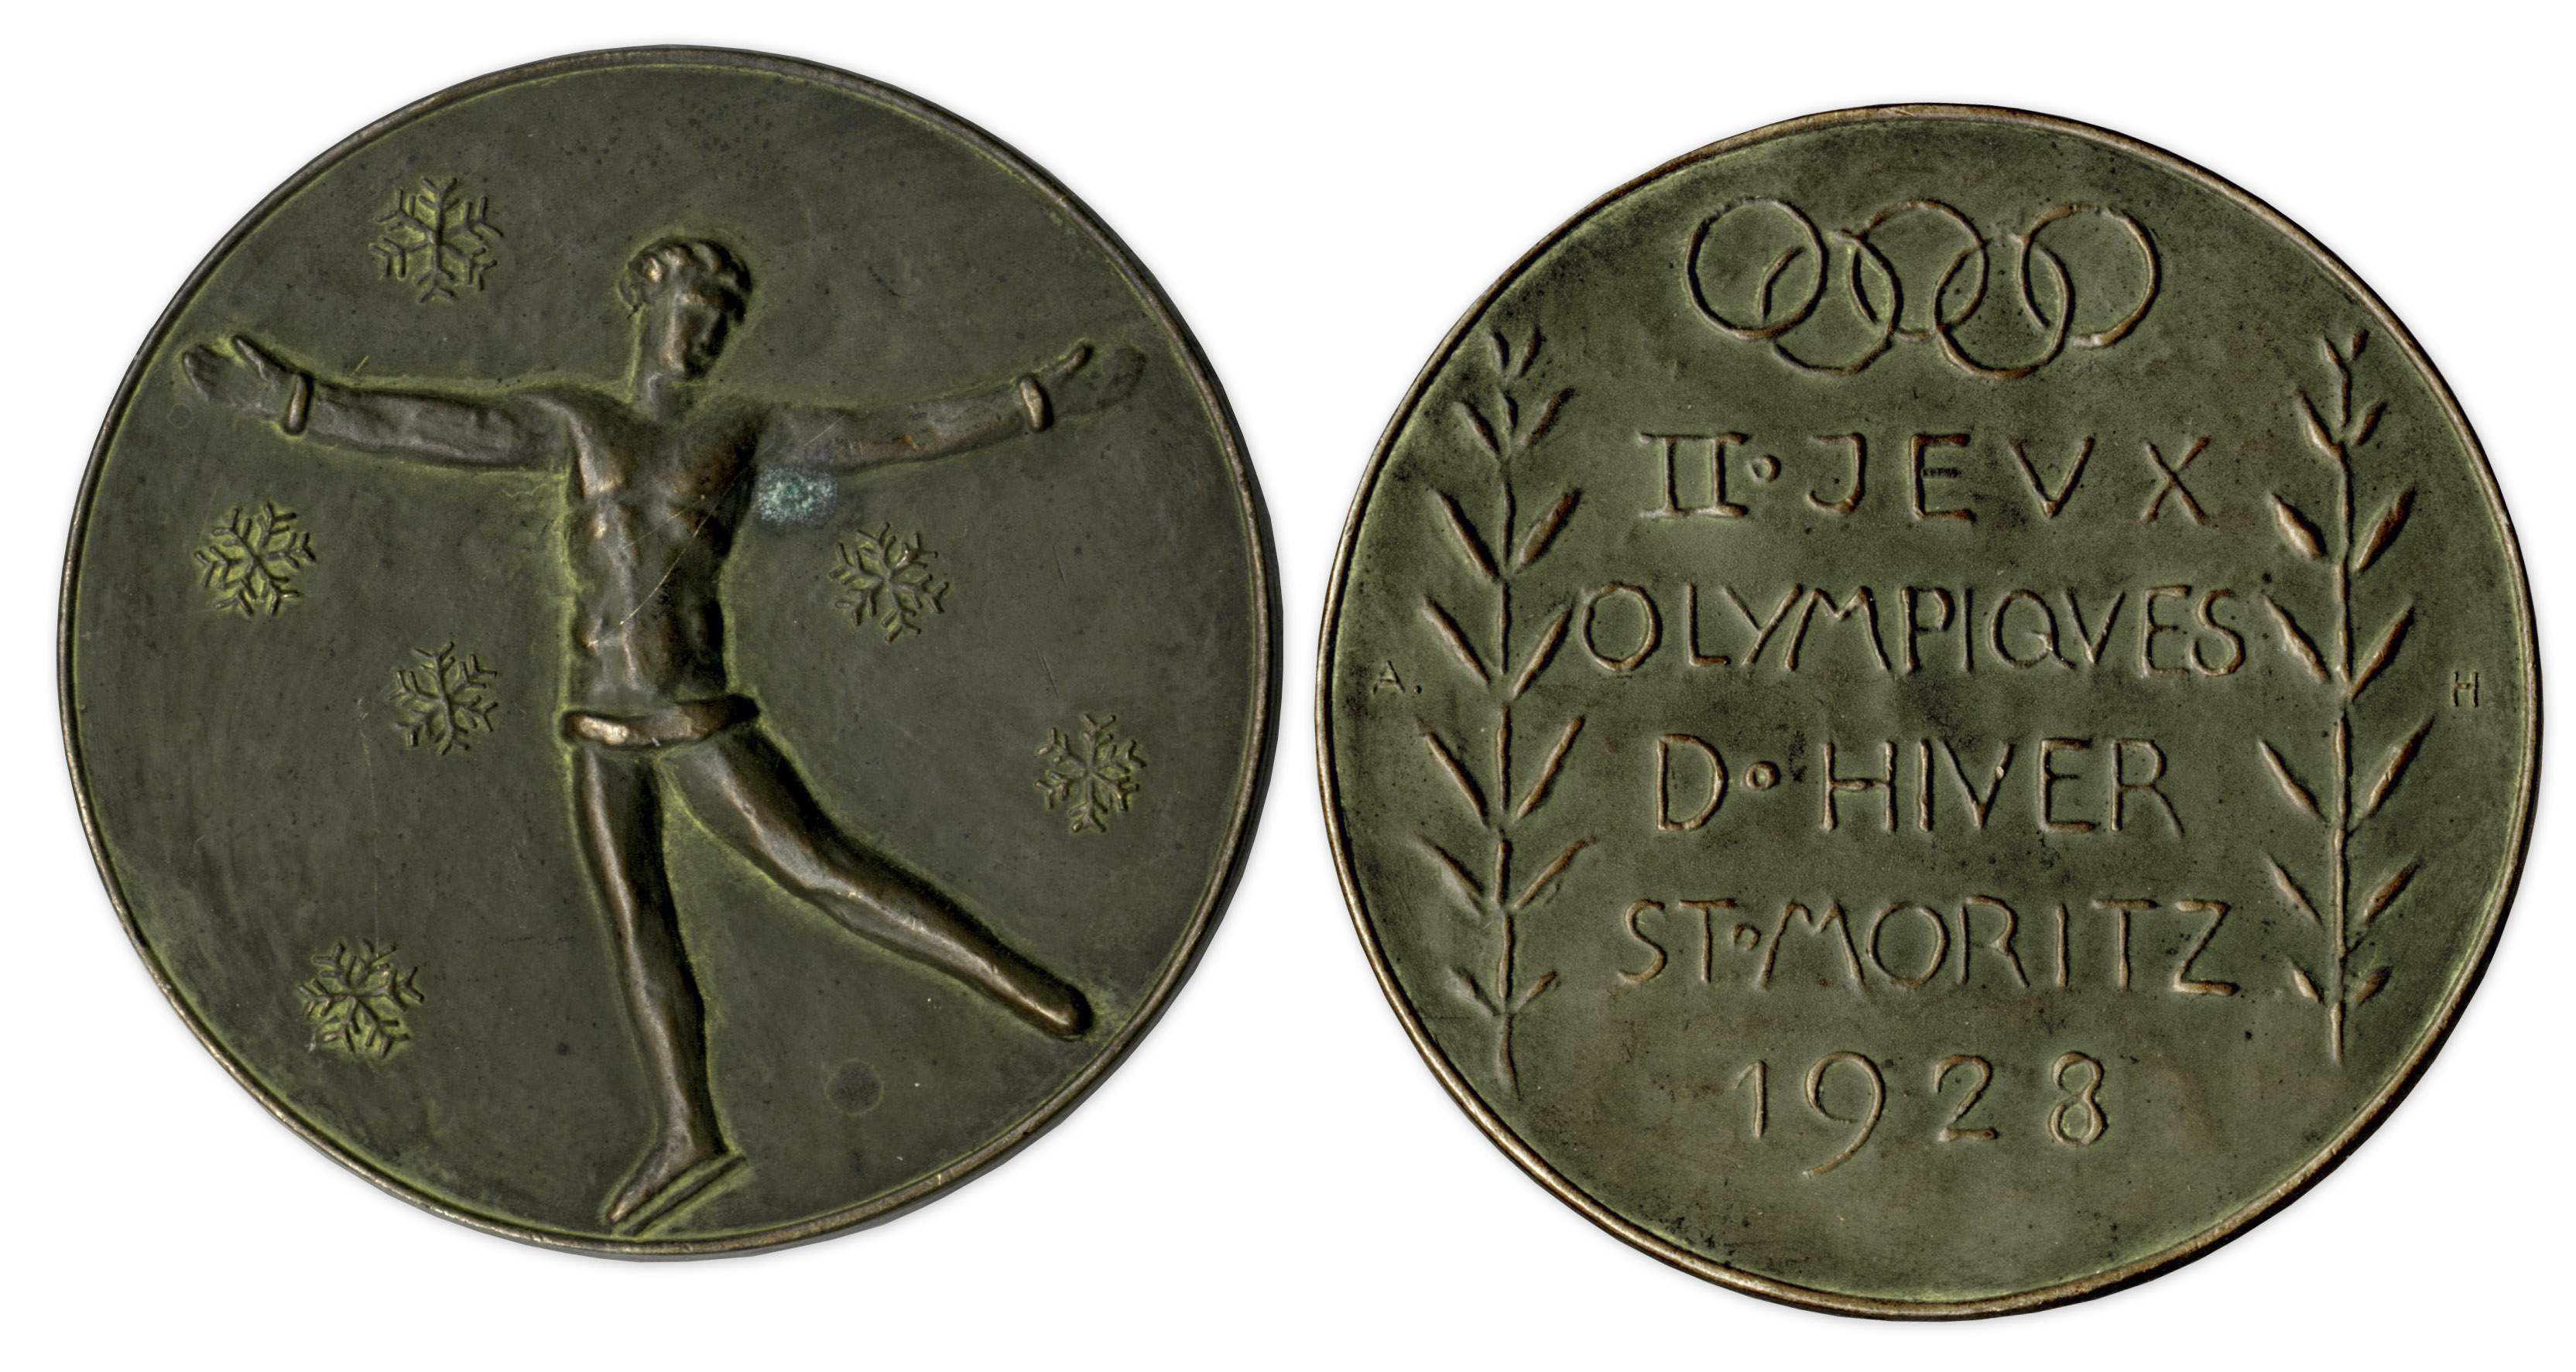 Lot Detail - Bronze Olympic Medal From the 1928 Winter Olympics, Held in St. Moritz, Switzerland